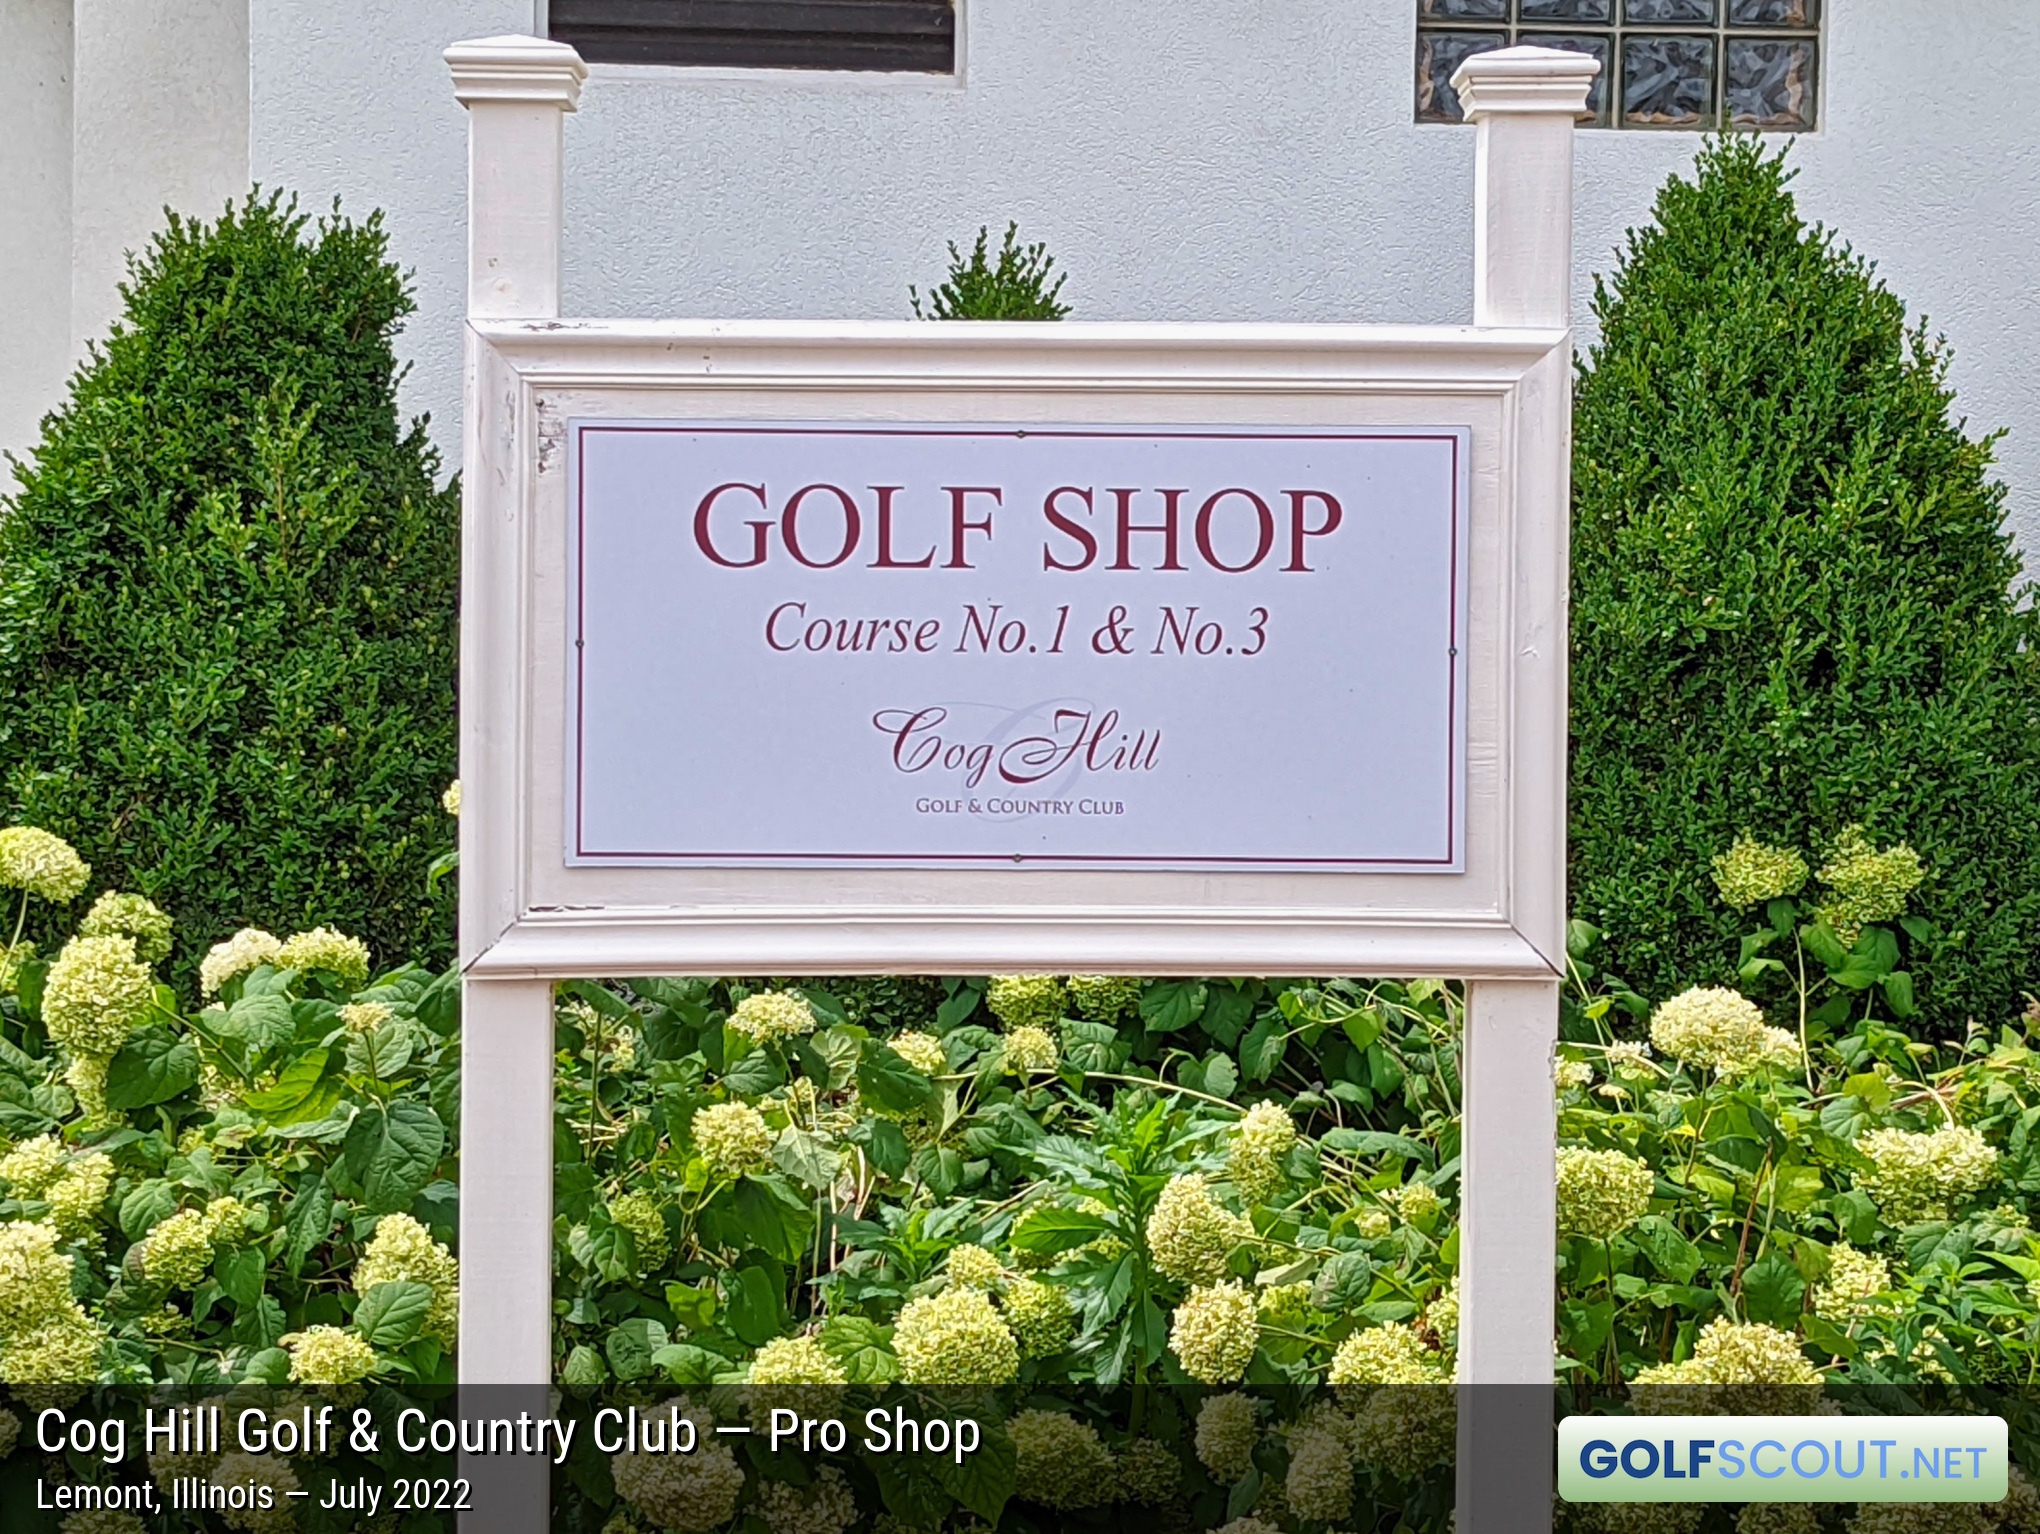 Photo of the pro shop at Cog Hill Course #1 in Lemont, Illinois. The pro shop for courses #1 and #3 is west of Parker Road, next to the main clubhouse. There's a big practice green next to it.